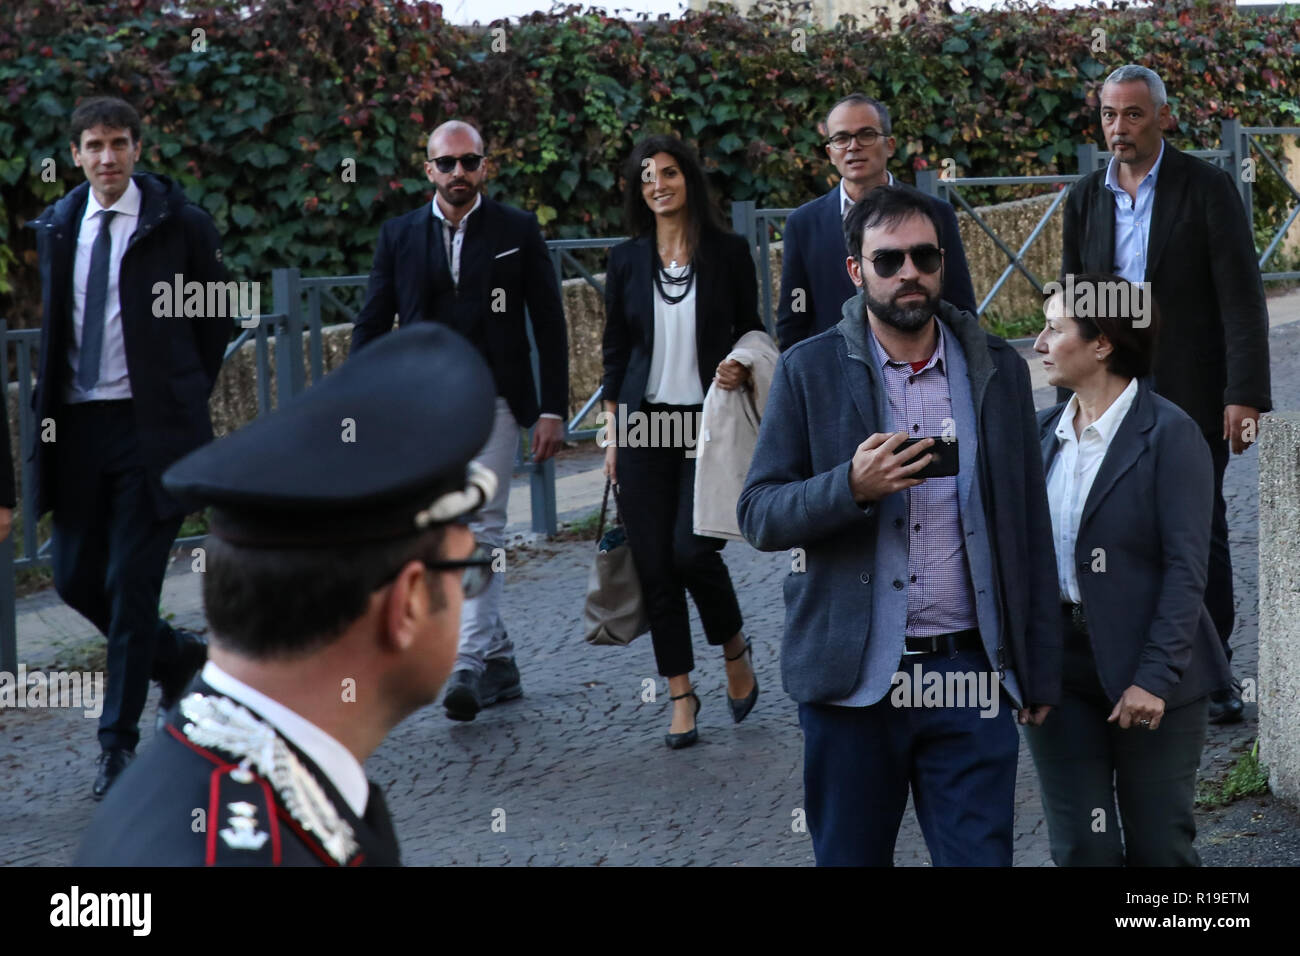 Mayor of Rome and member of the Five Star Movement (M5S), Virginia Raggi seen leaving the courthouse after being discharged of accusations of corrupt hiring practices. Rome's public prosecutor on Friday requested a ten-month jail term for Virginia Raggi, who became the city's first female mayor in 2016. Virginia Raggi was accused of making false statements regarding the appointment of Renato Marra as Rome's tourism chief. Stock Photo